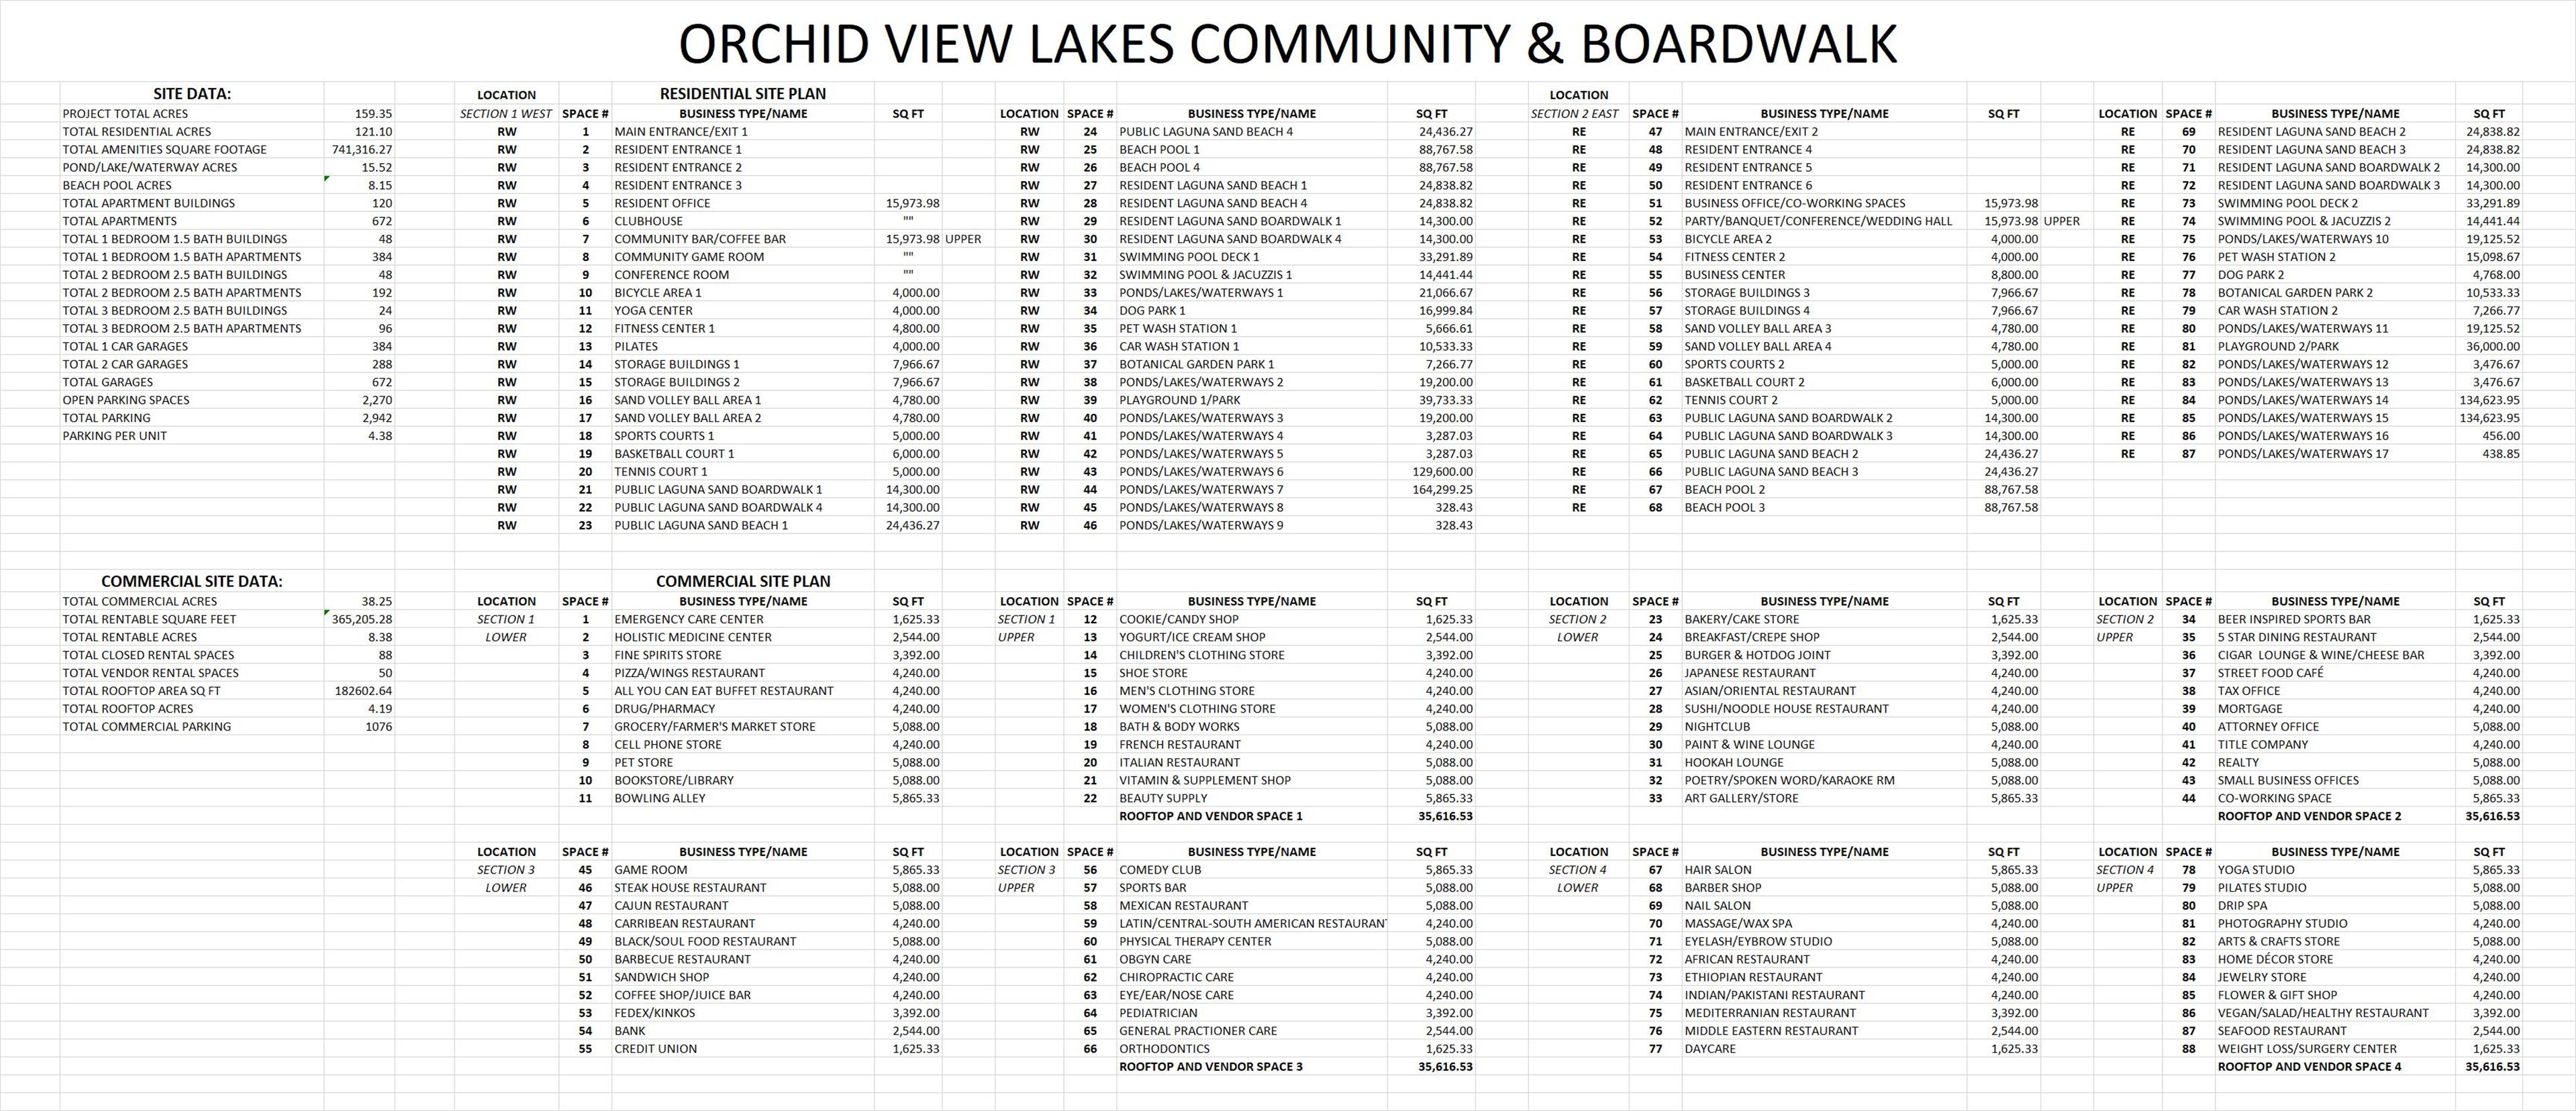 ORCHID VIEW LAKES COMMUNITY AND BOARDWALKK